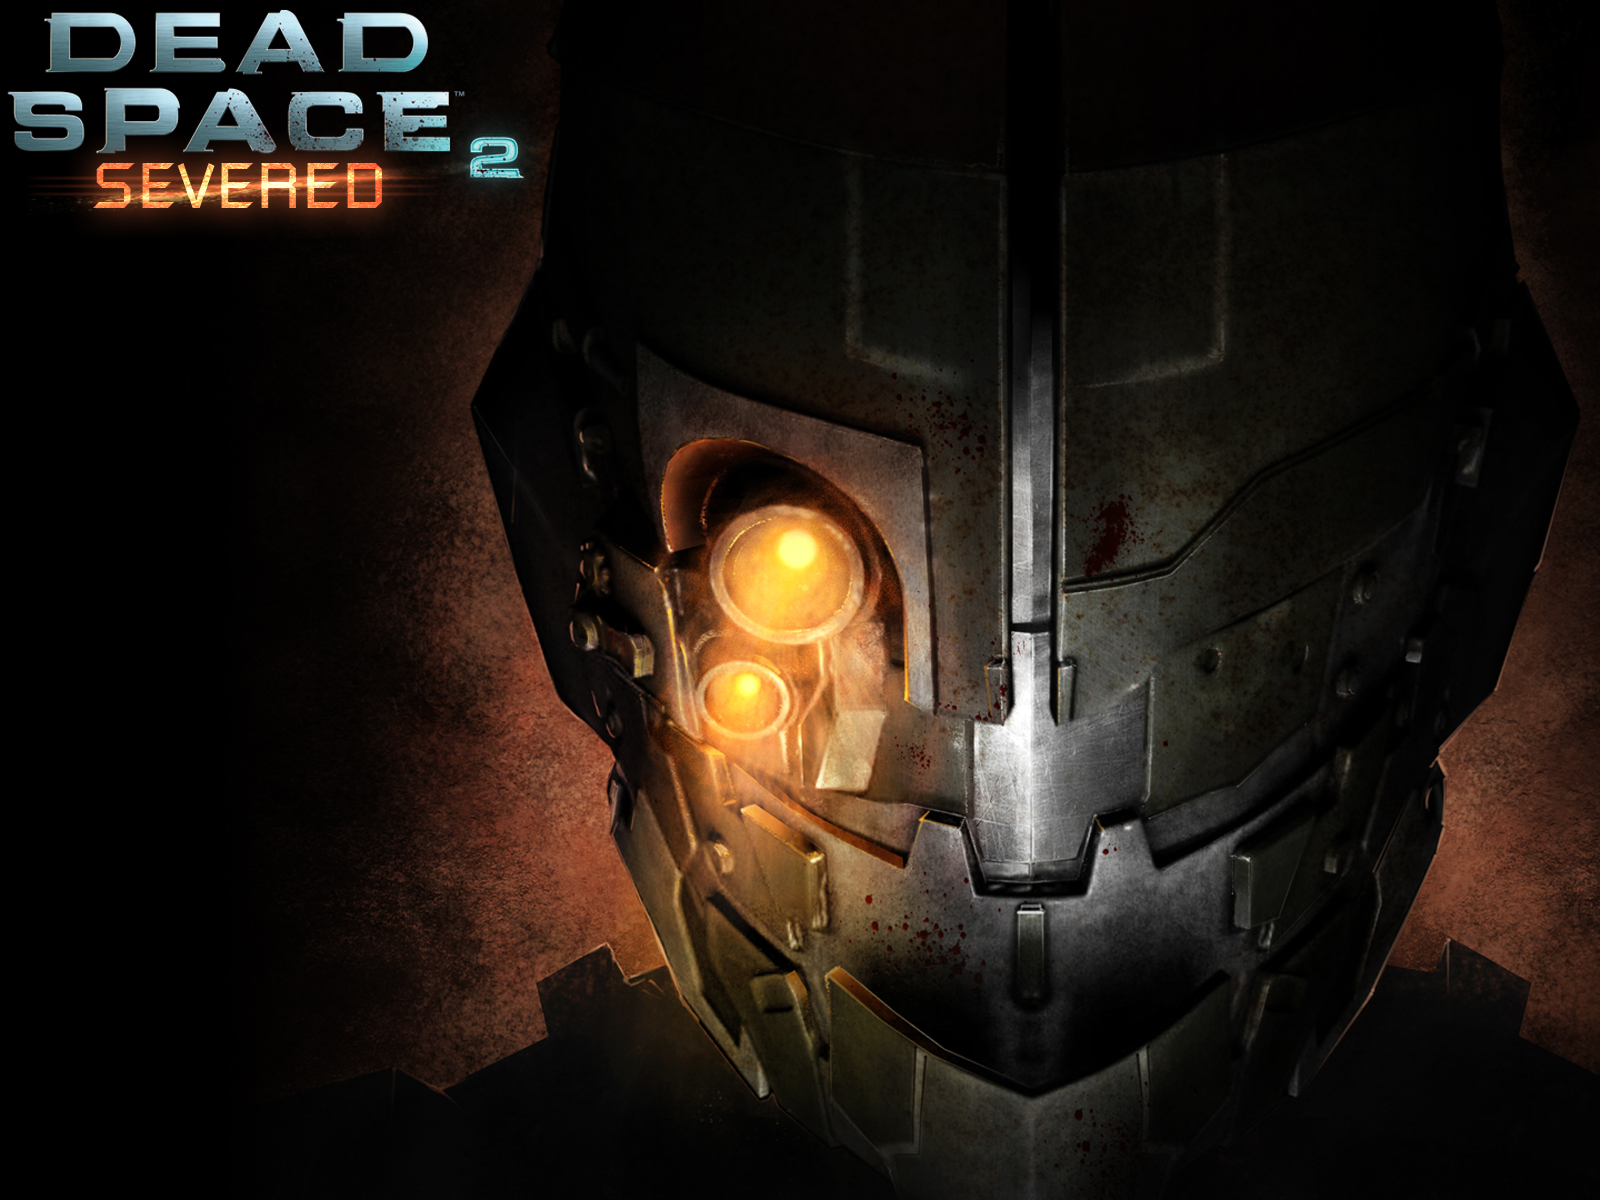 Download the Dead Space Severed Wallpaper, Dead Space Severed ...